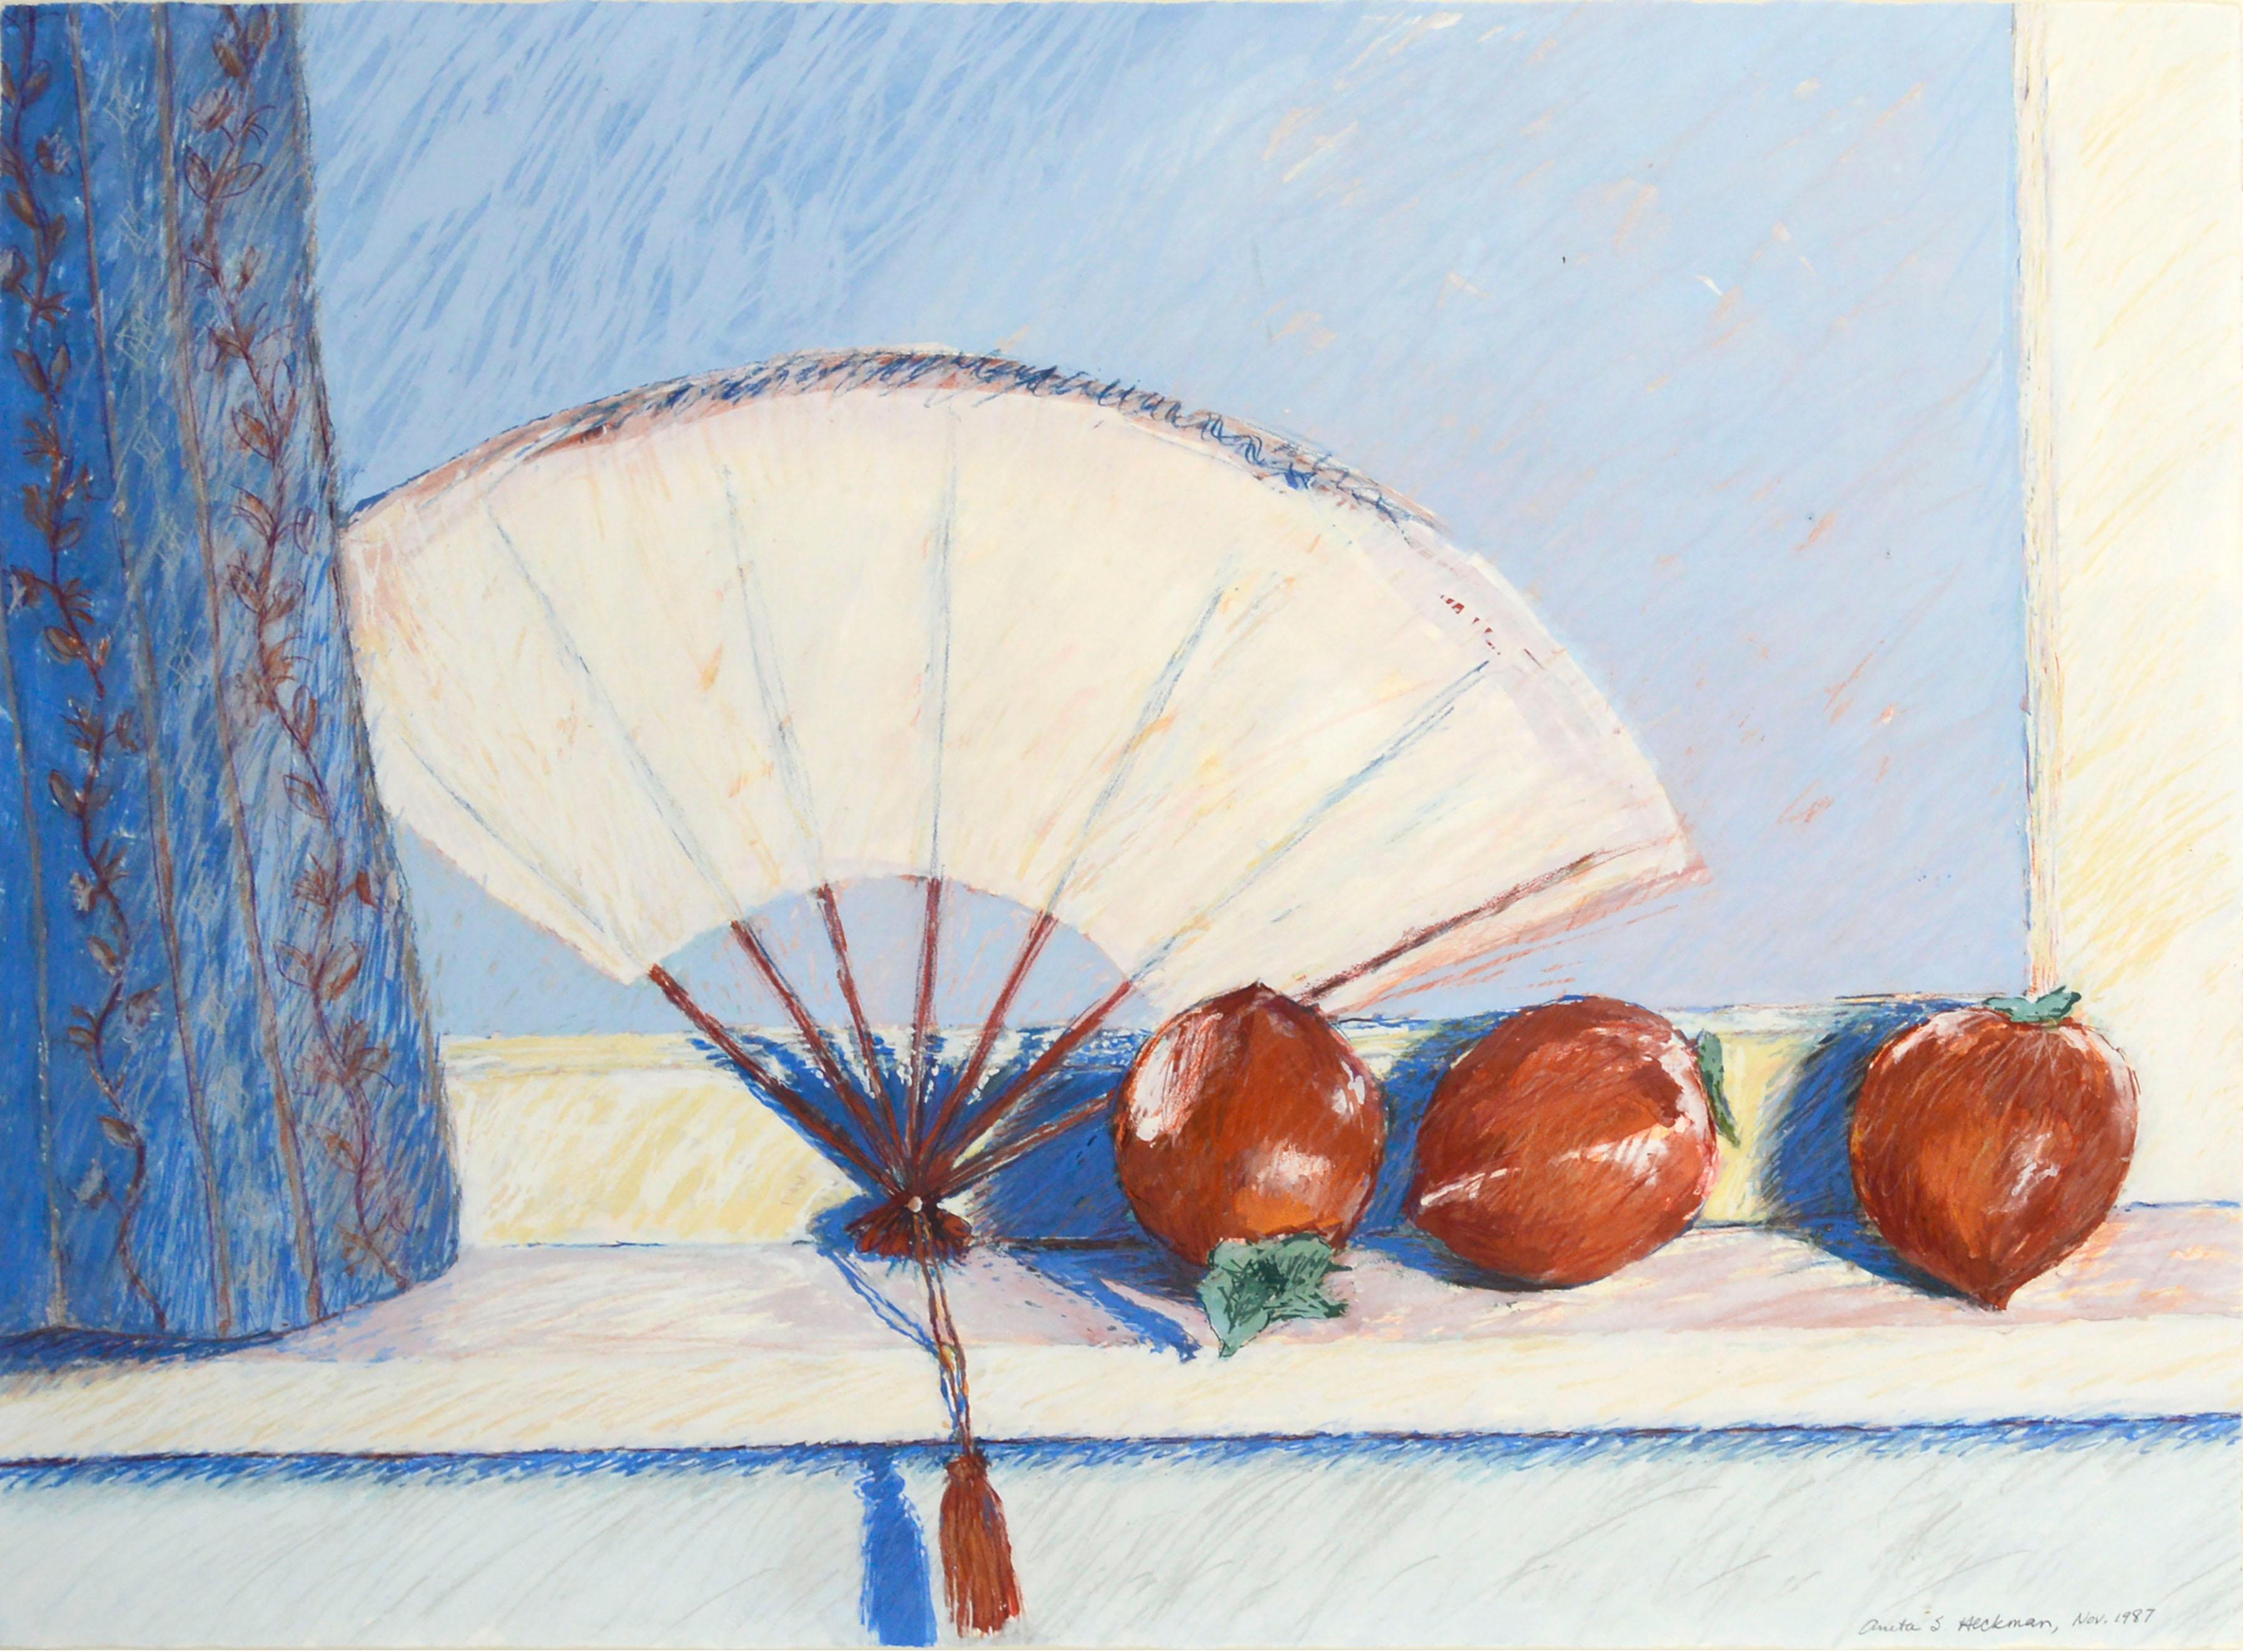 Hachiya Persimmons & Fan, Modern Still Life with Red-Orange and Blue  - Art by Anita Heckman